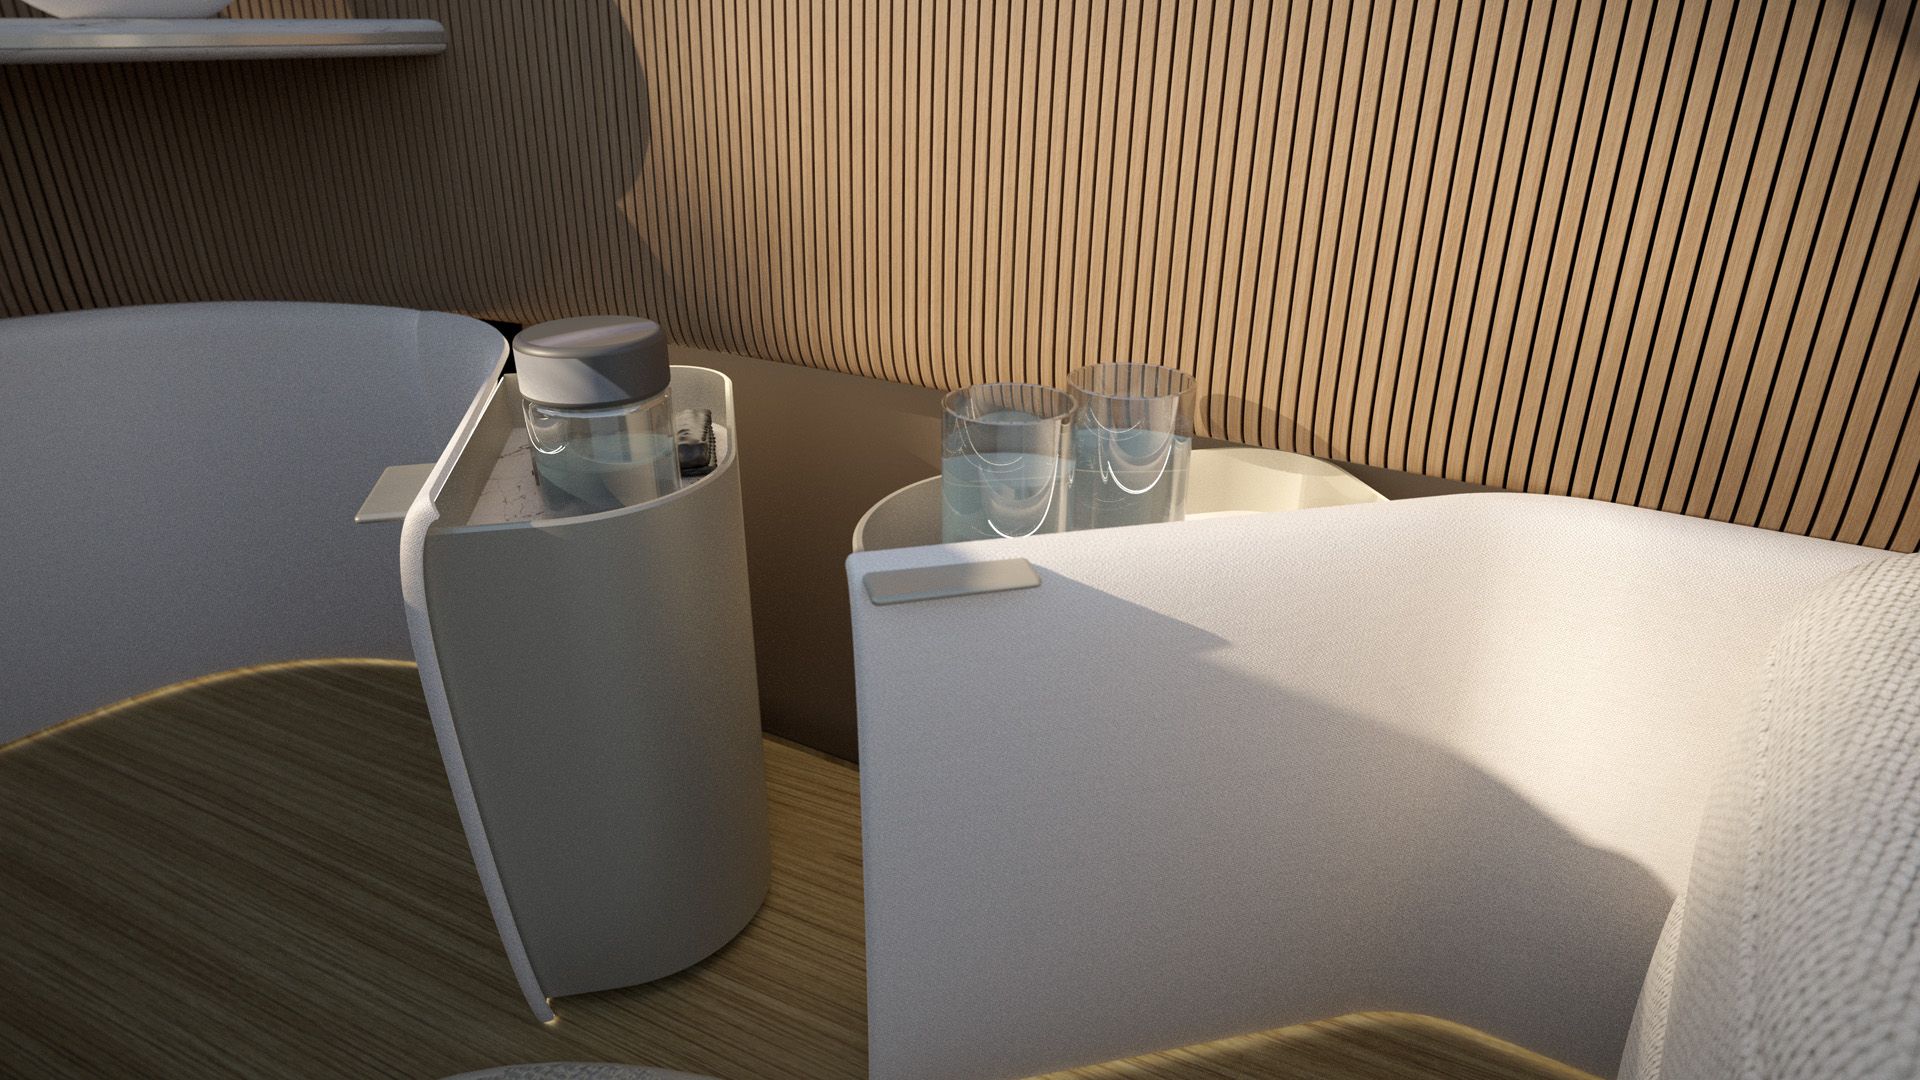 The seat elements in Poliform's interior design for the Audi urbansphere concept include drink holders.